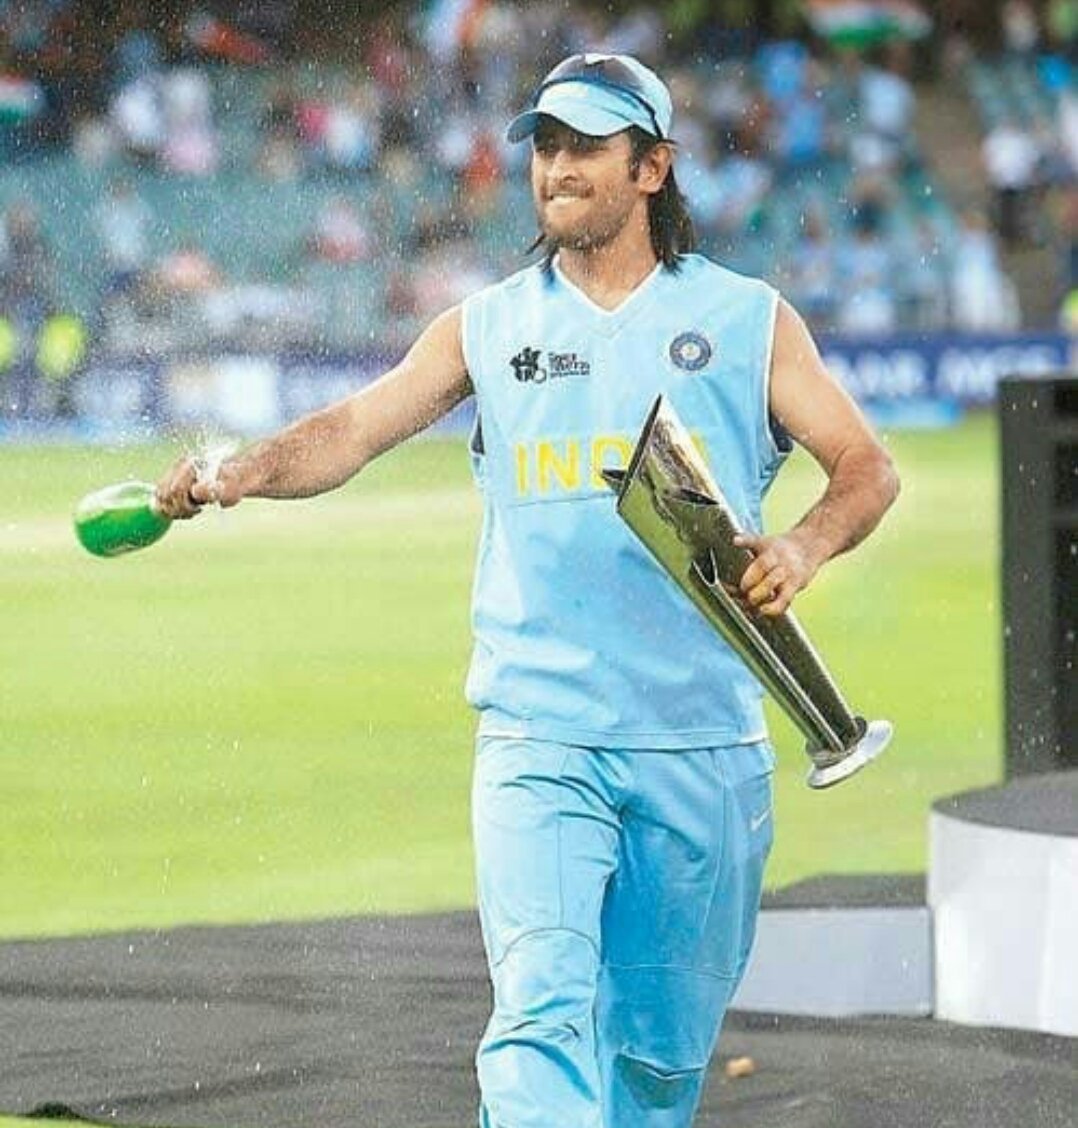 Finally Dhoni retired from international cricket Msdian forever 